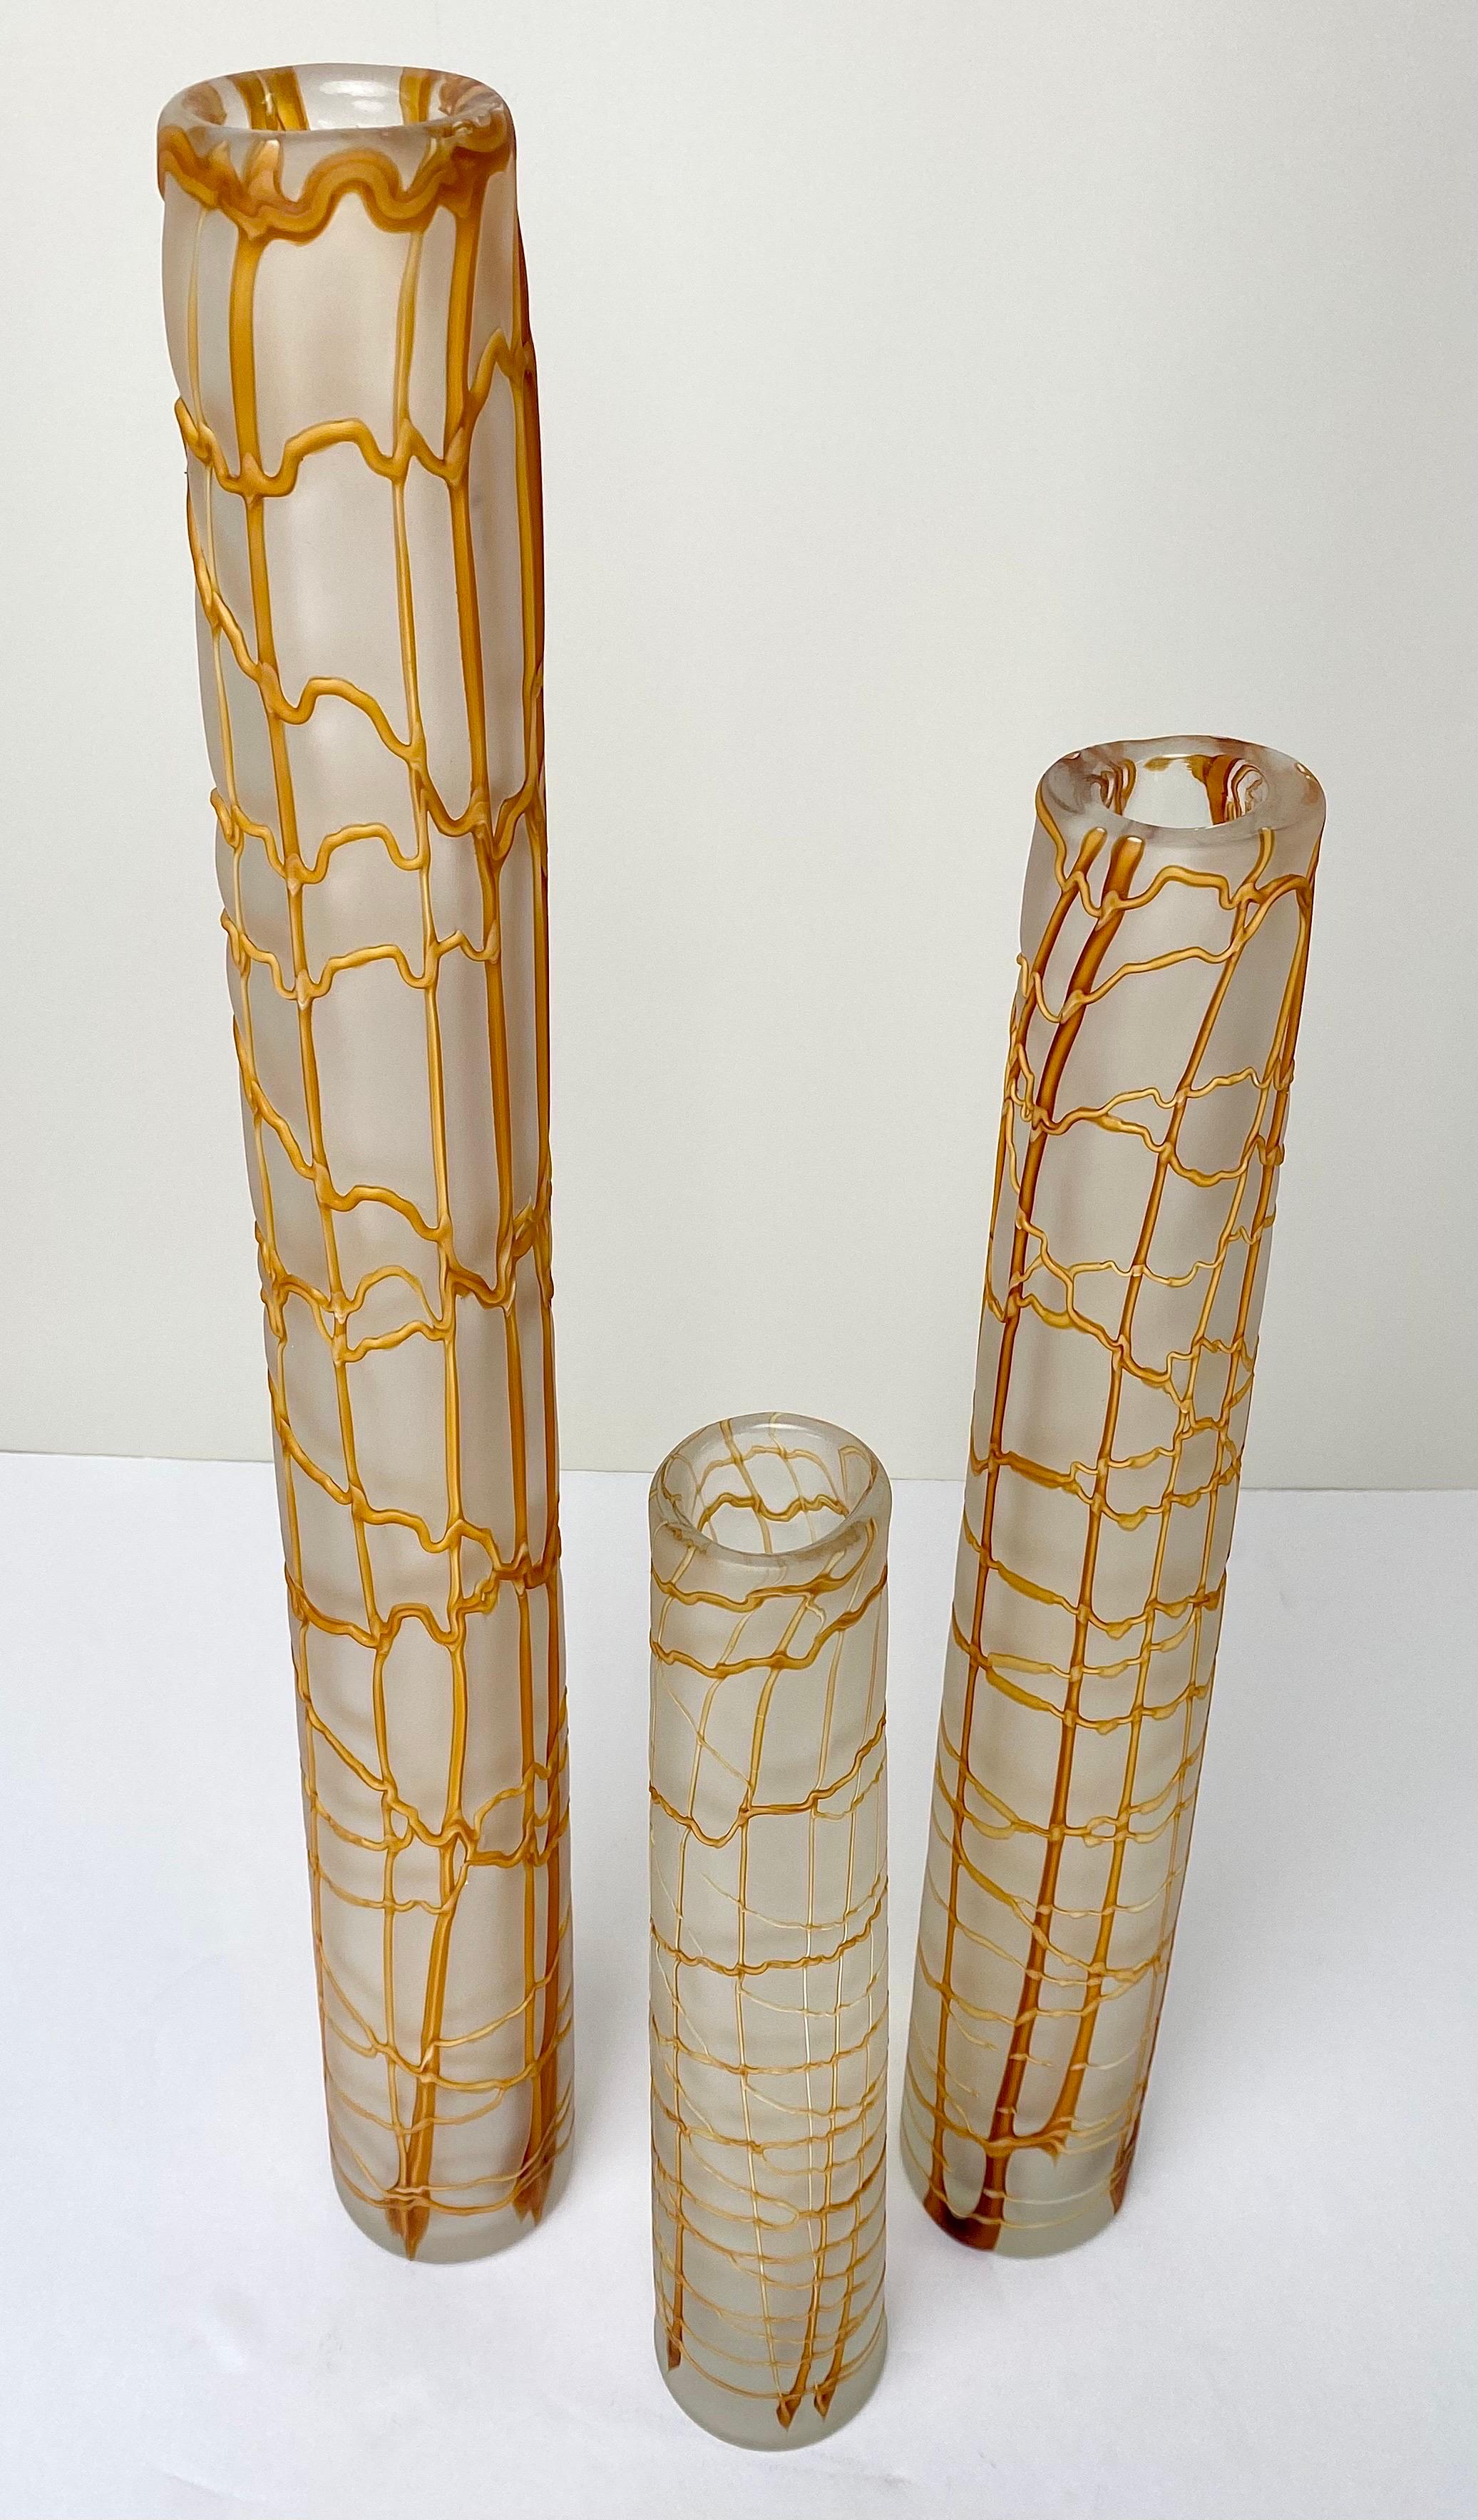 A trio of Modern Kintsugi-style skinny vases, each a unique embodiment of artistry and contemporary design. Crafted in three dimensions—tall, medium, and small—these vases are a testament to the seamless fusion of traditional Kintsugi aesthetics and